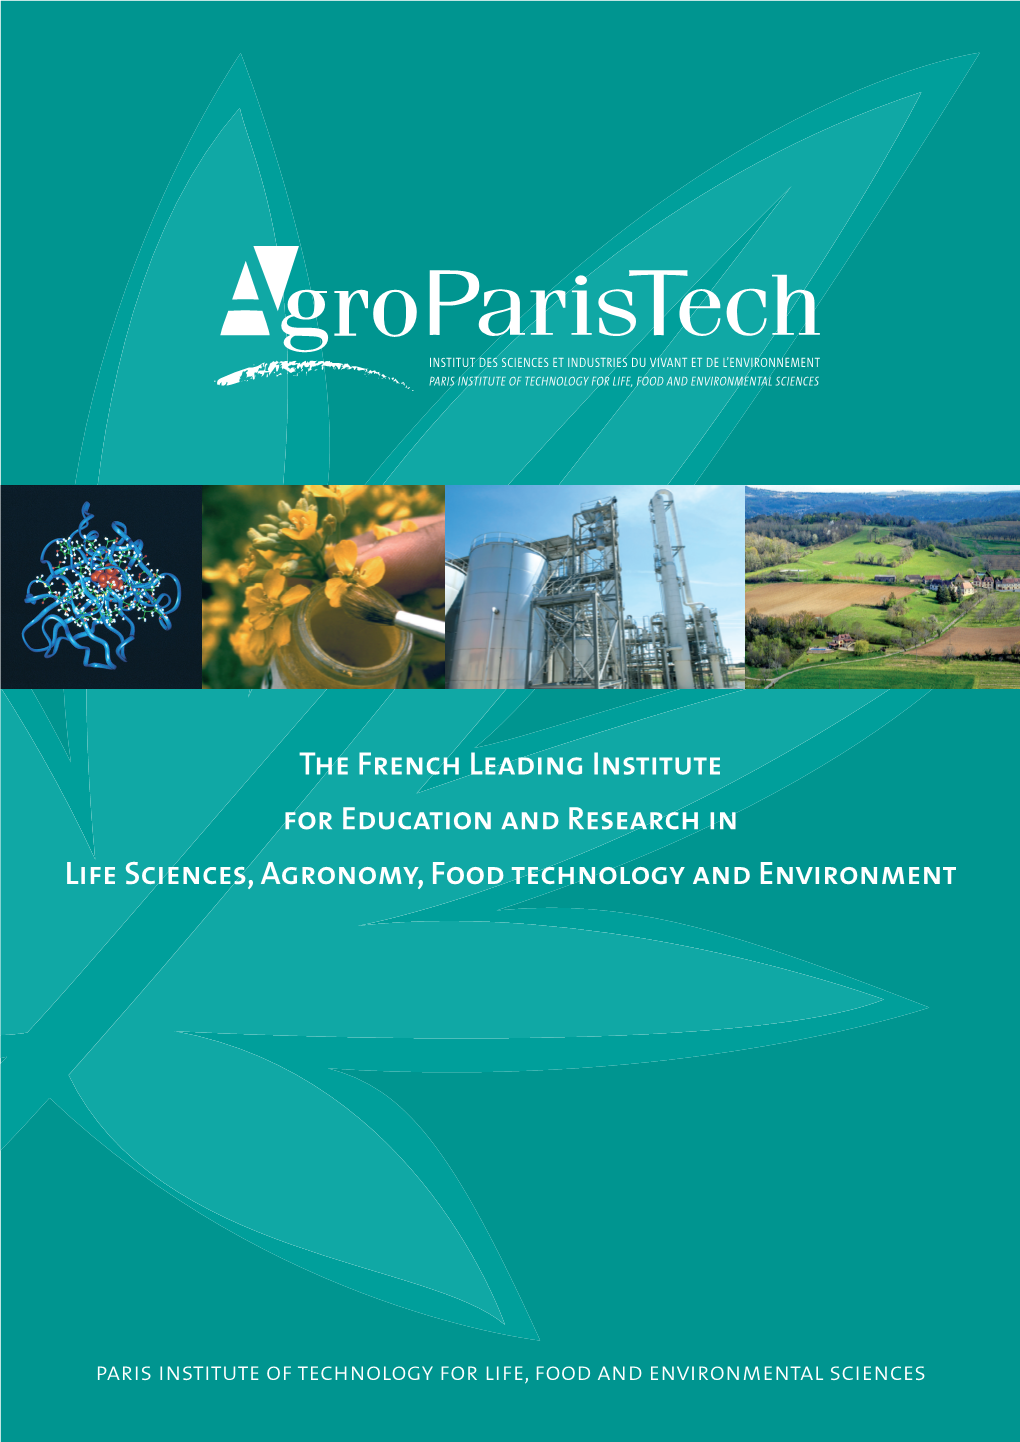 The French Leading Institute for Education and Research in Life Sciences, Agronomy, Food Technology and Environment